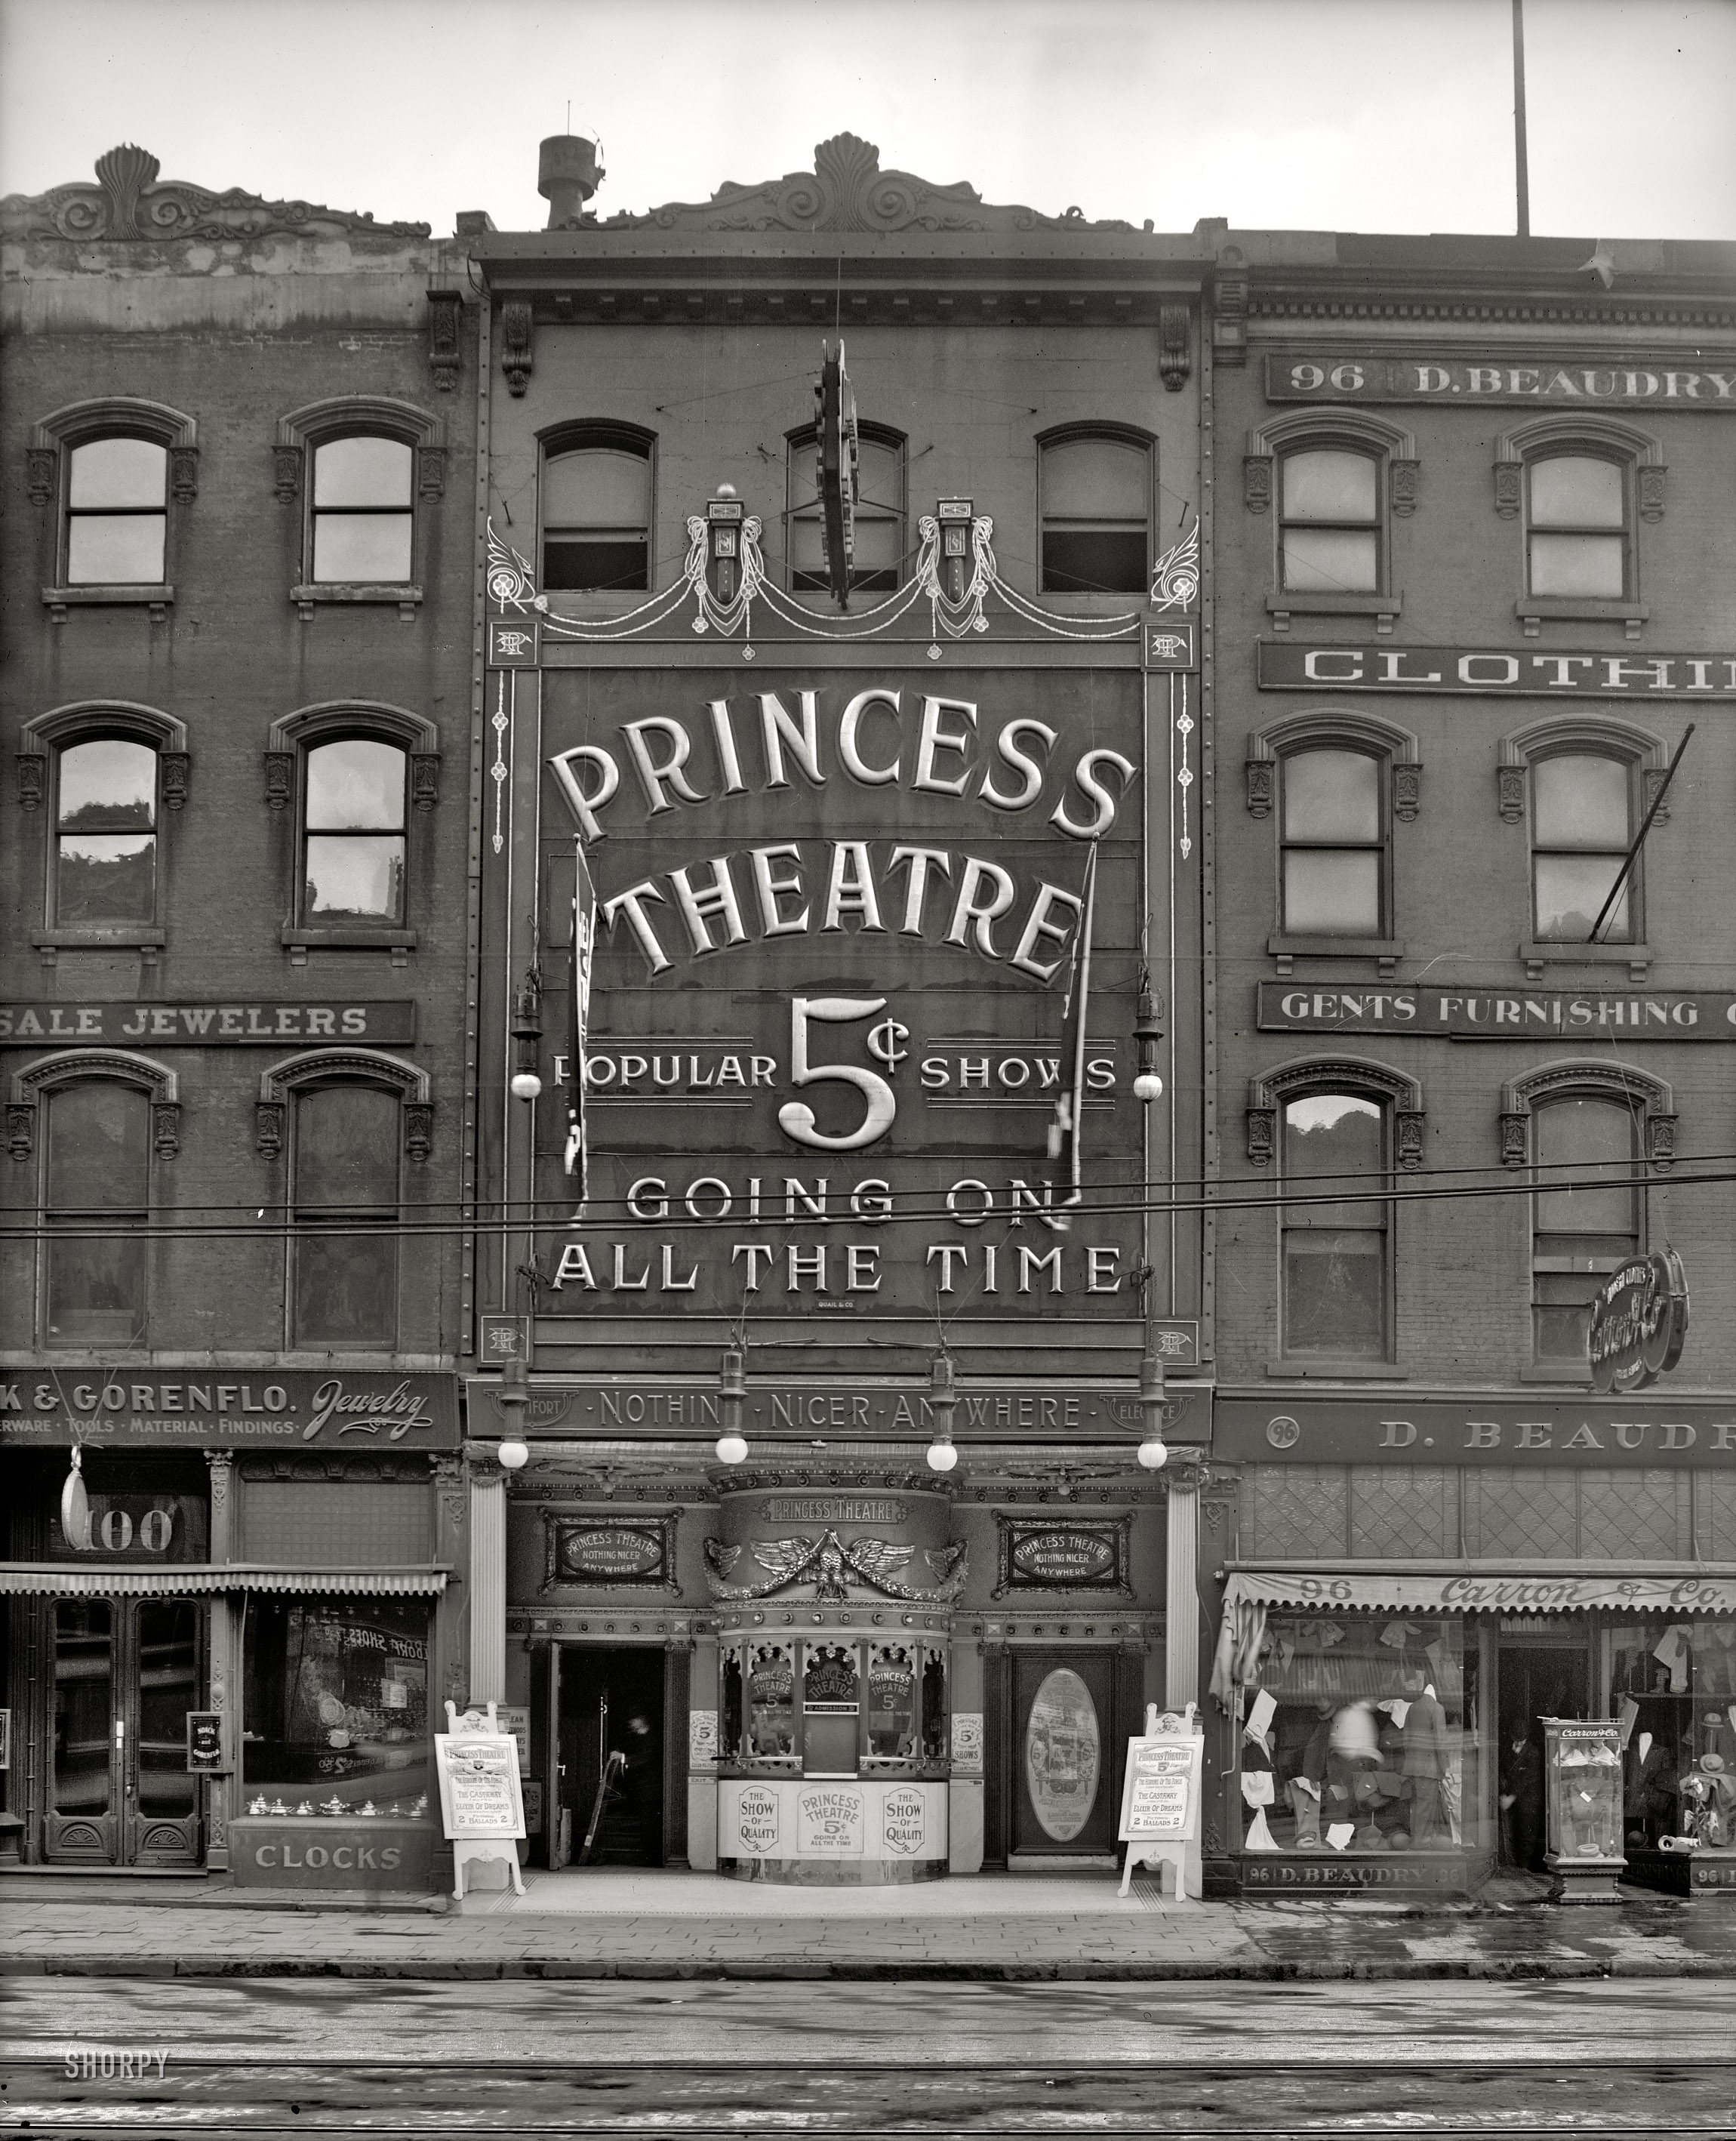 Detroit, Michigan, circa 1909. "Princess Theatre." Nothing nicer anywhere! 8x10 inch dry plate glass negative, Detroit Publishing Company. View full size.